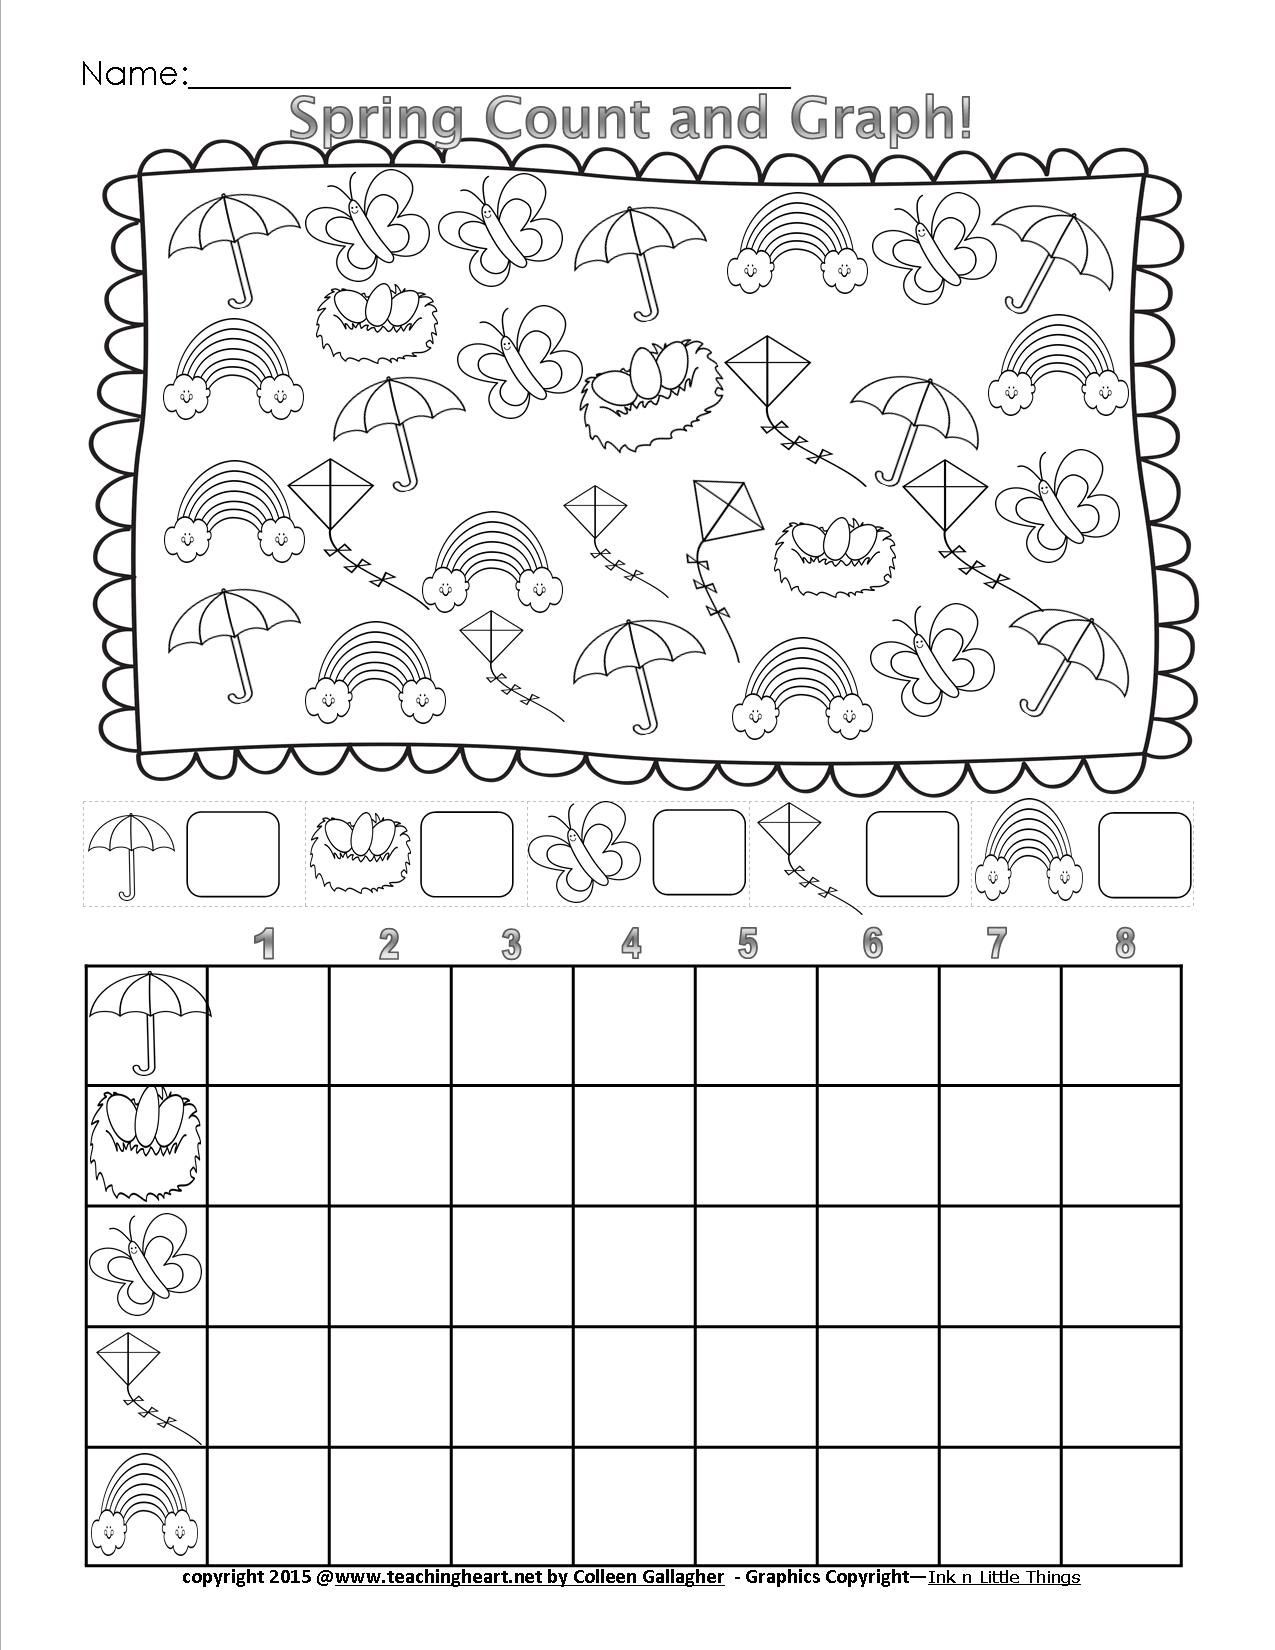 Graphing Worksheets Kindergarten Spring Count and Graph Free